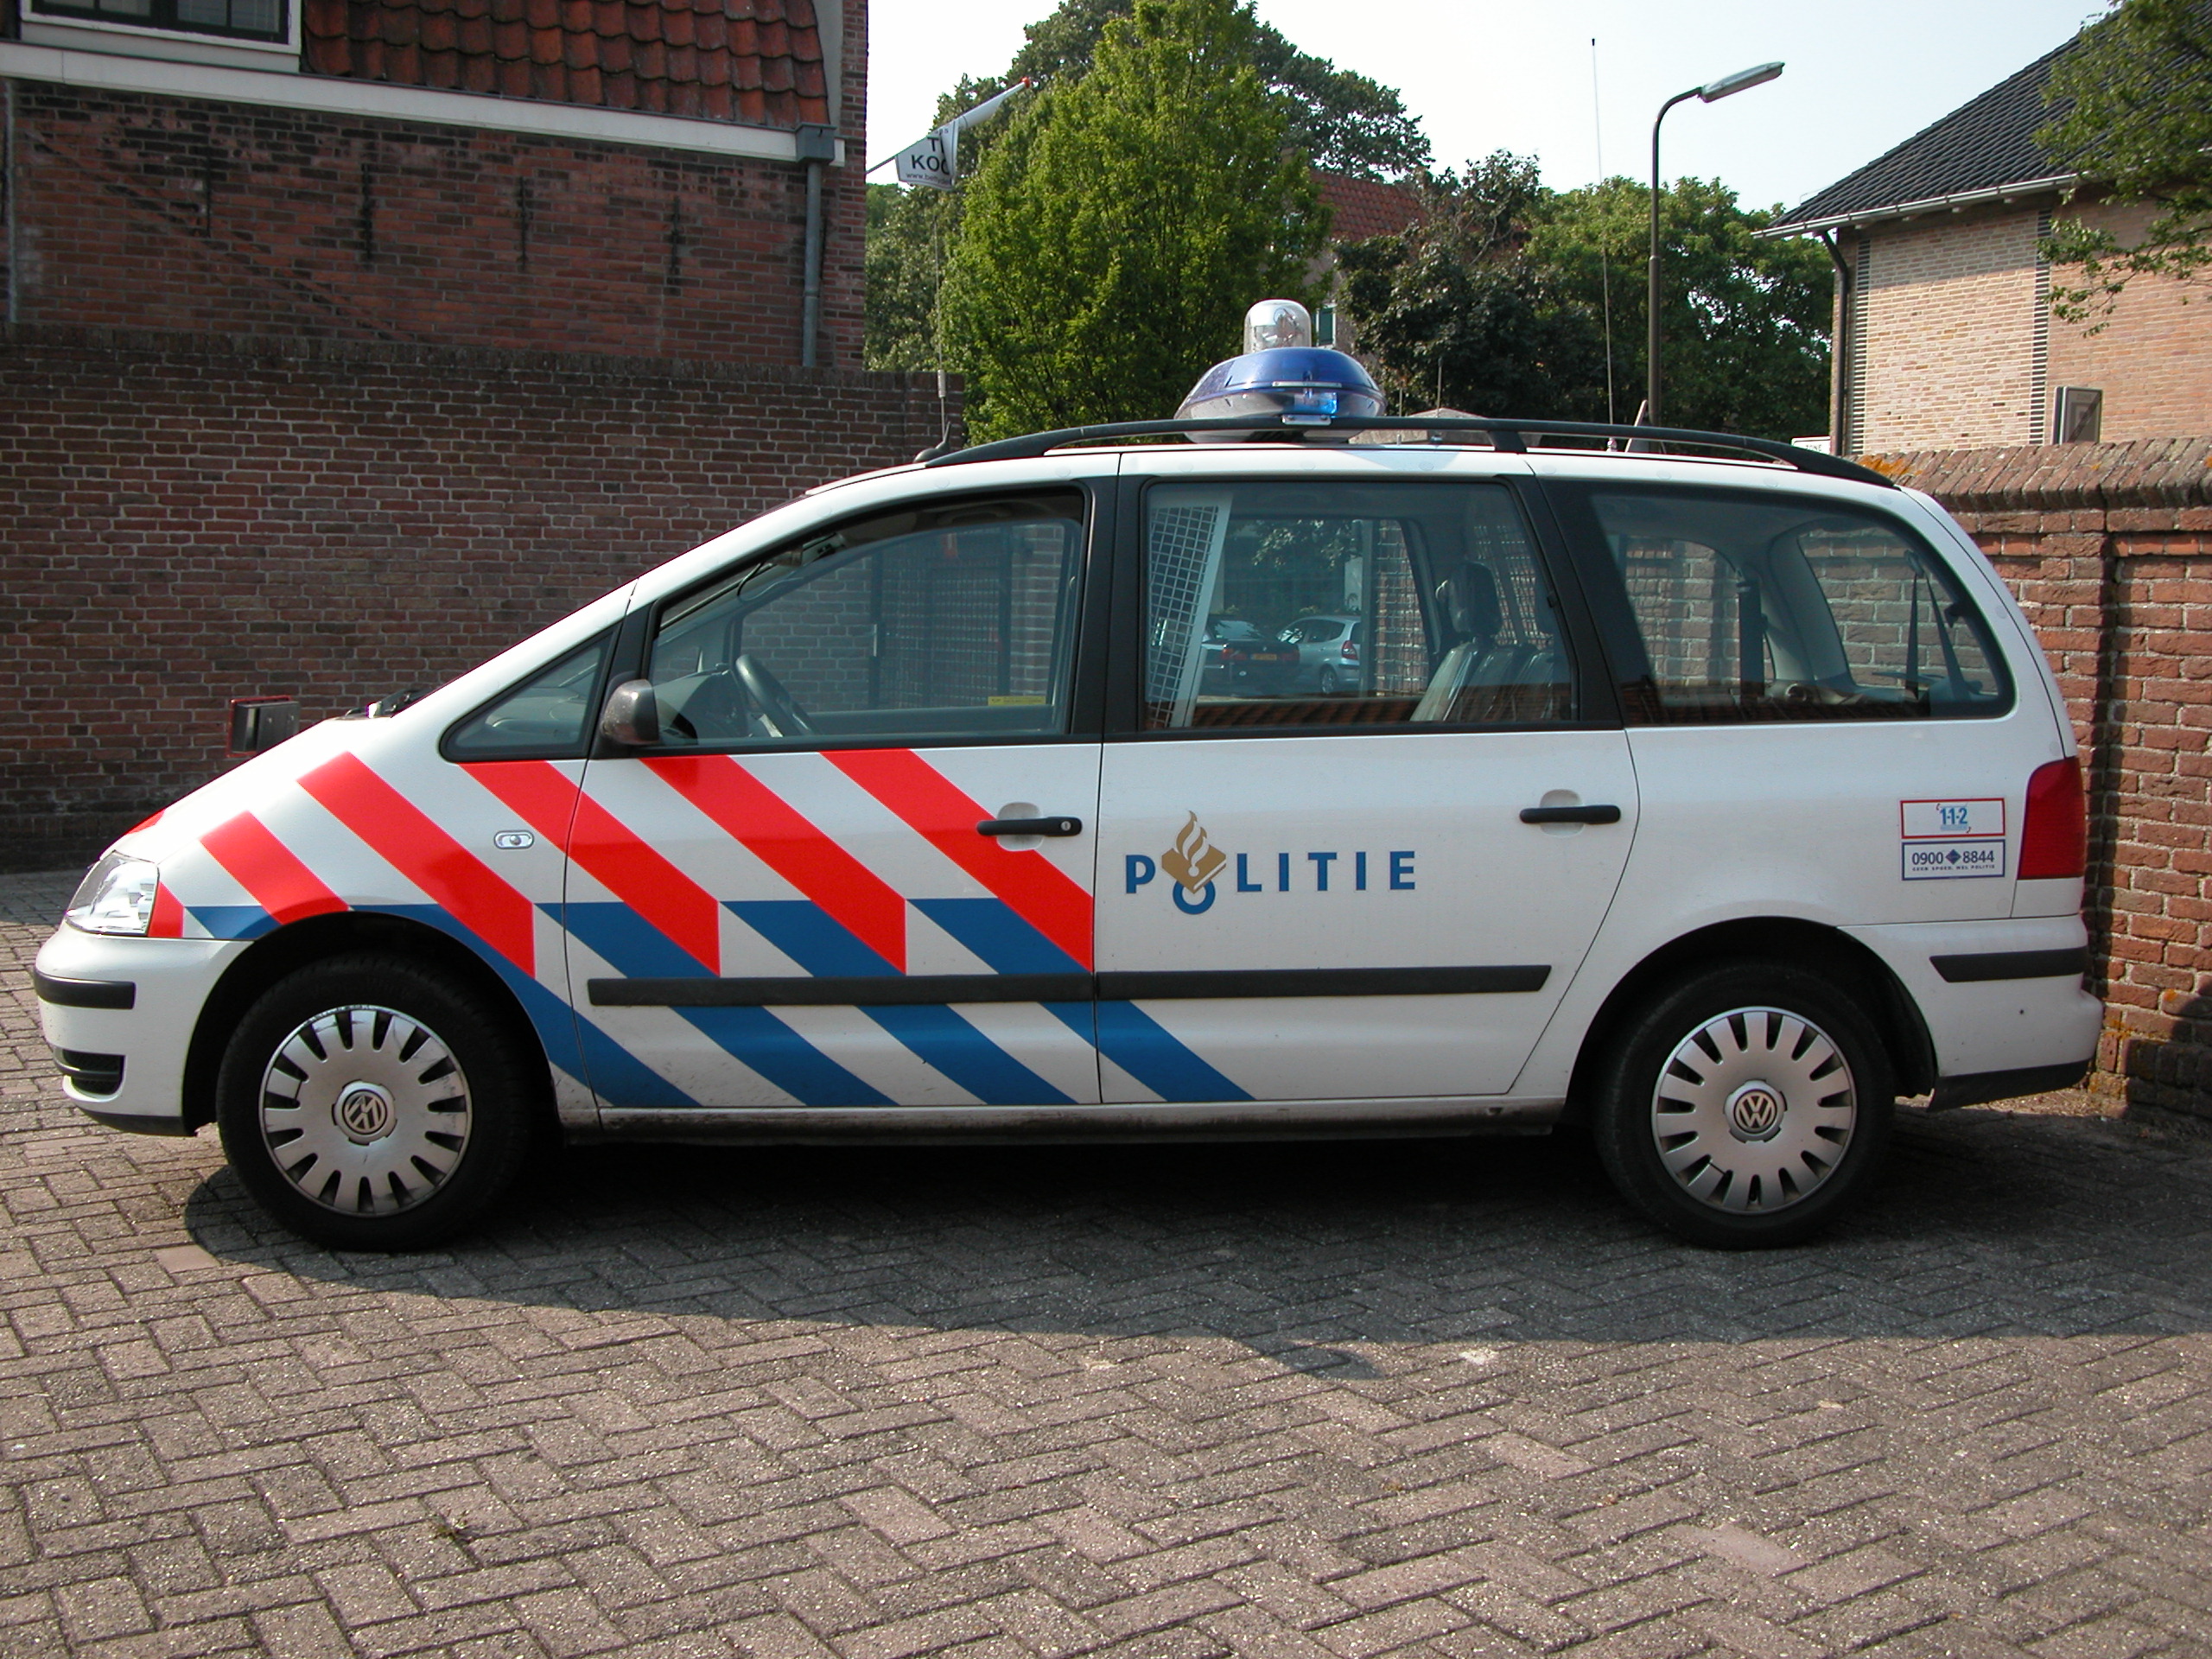 car van police politie dutch red white and blue stripes detective side